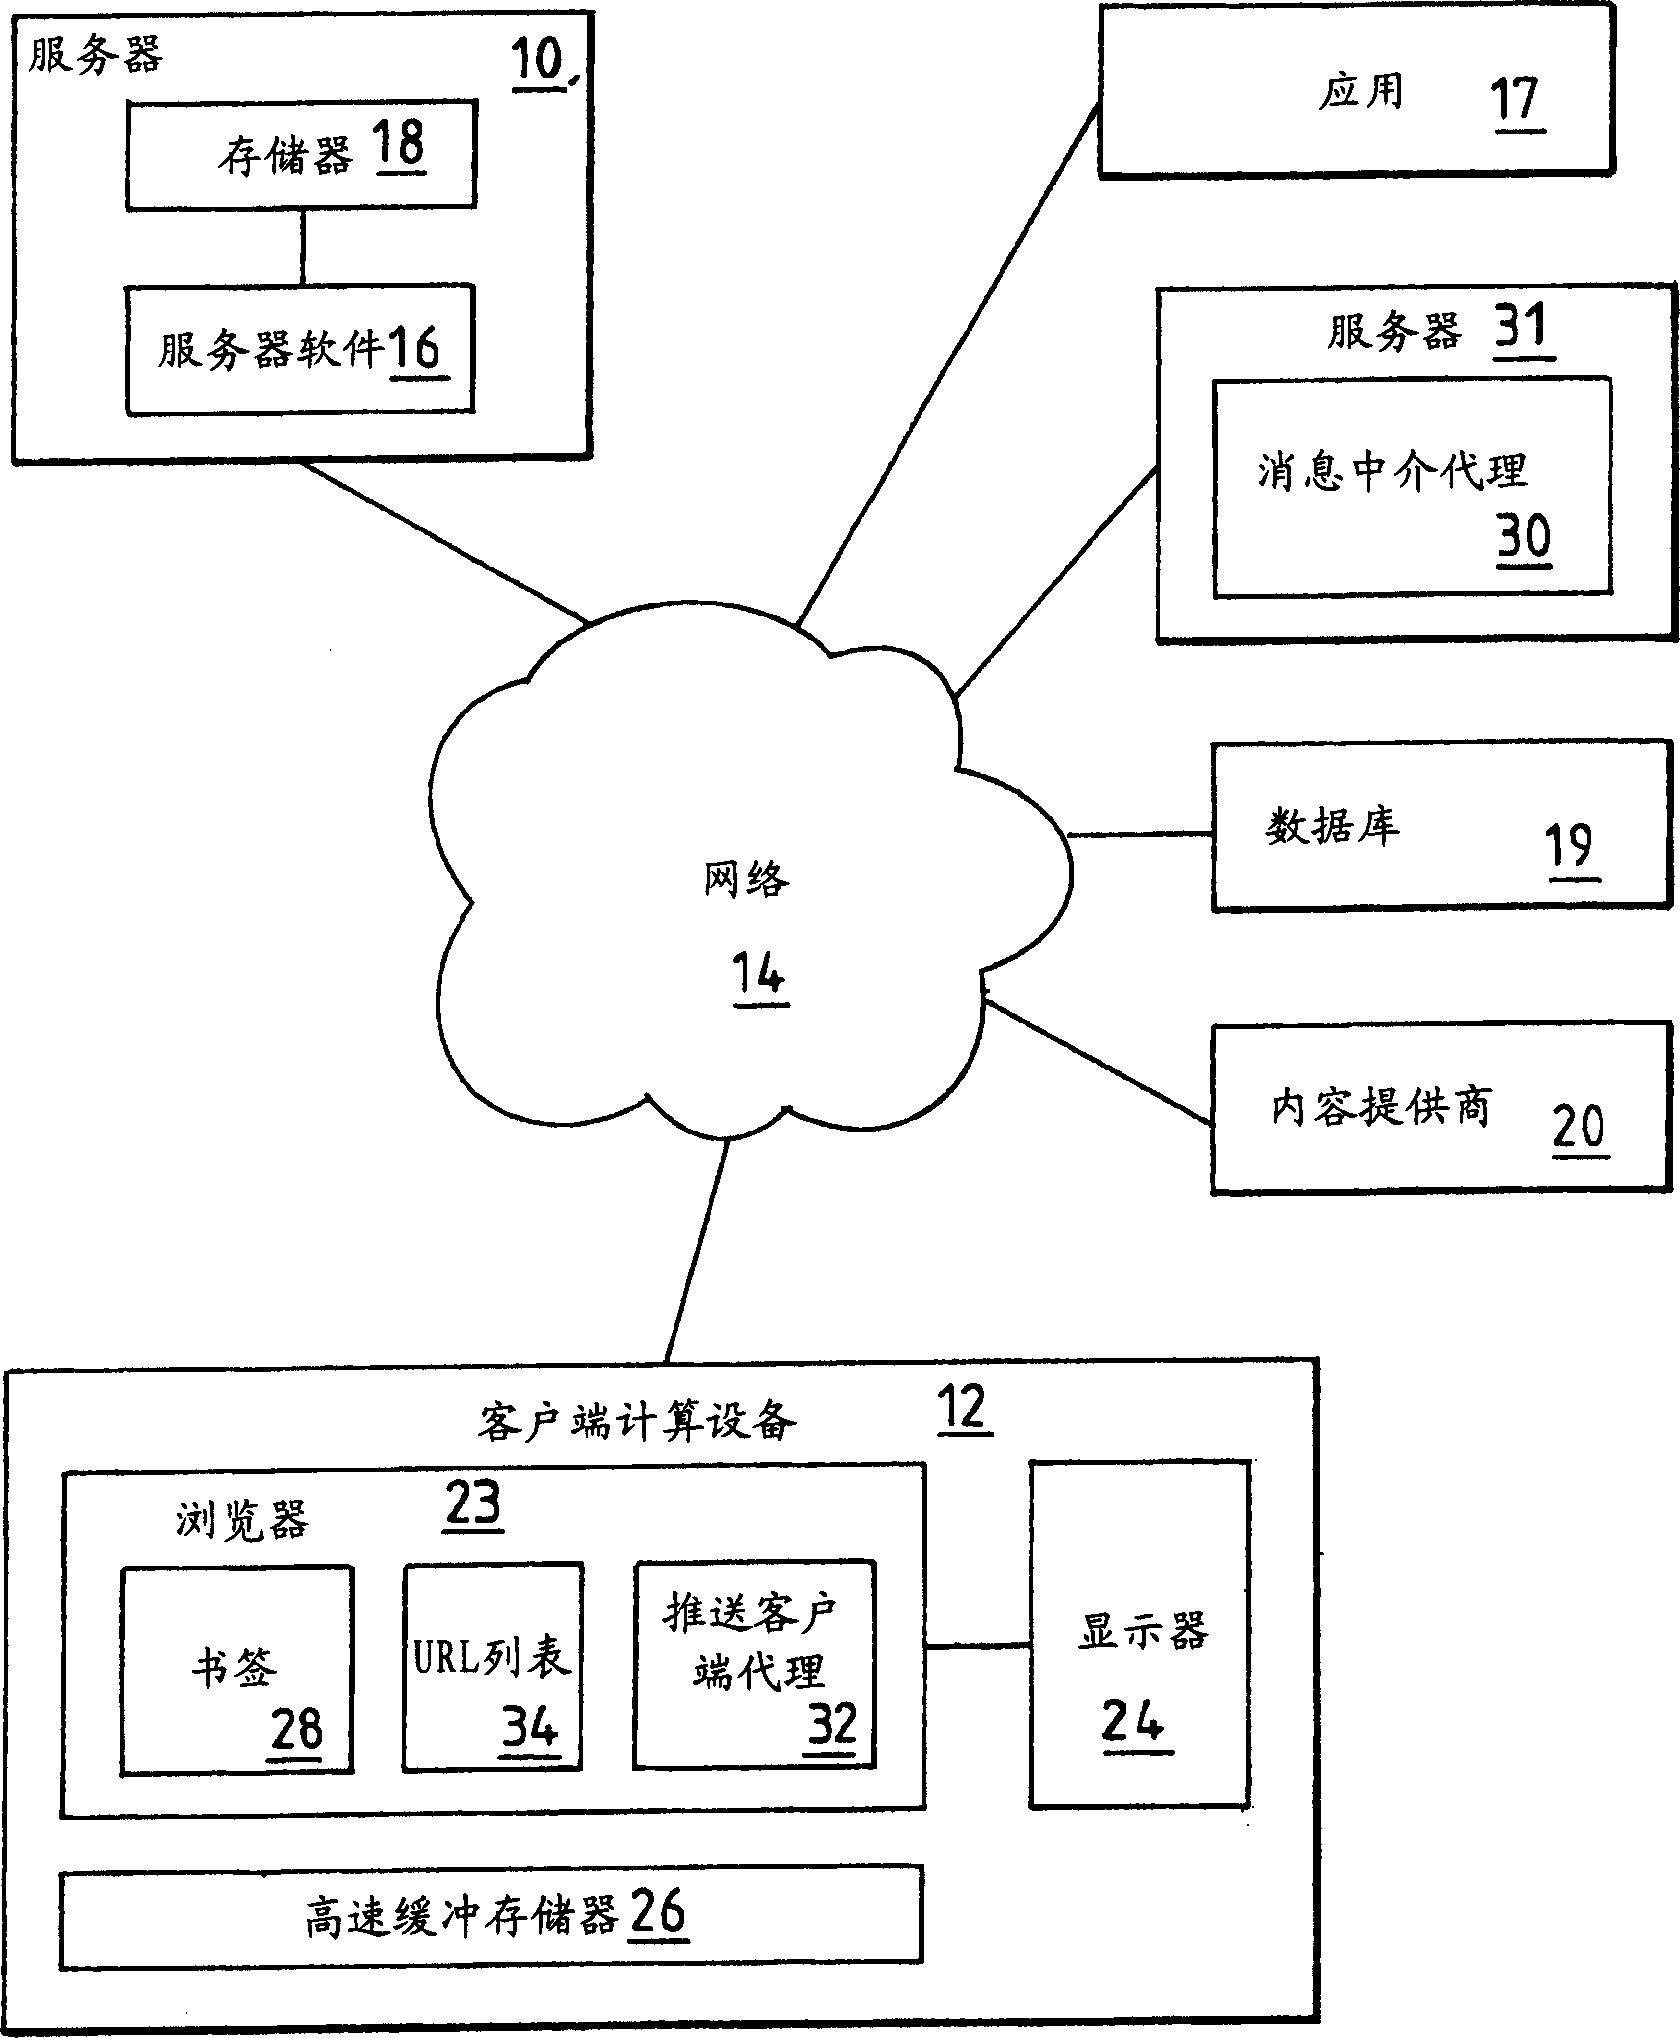 Method and system for updating/reloading the content of pages browsed over a network